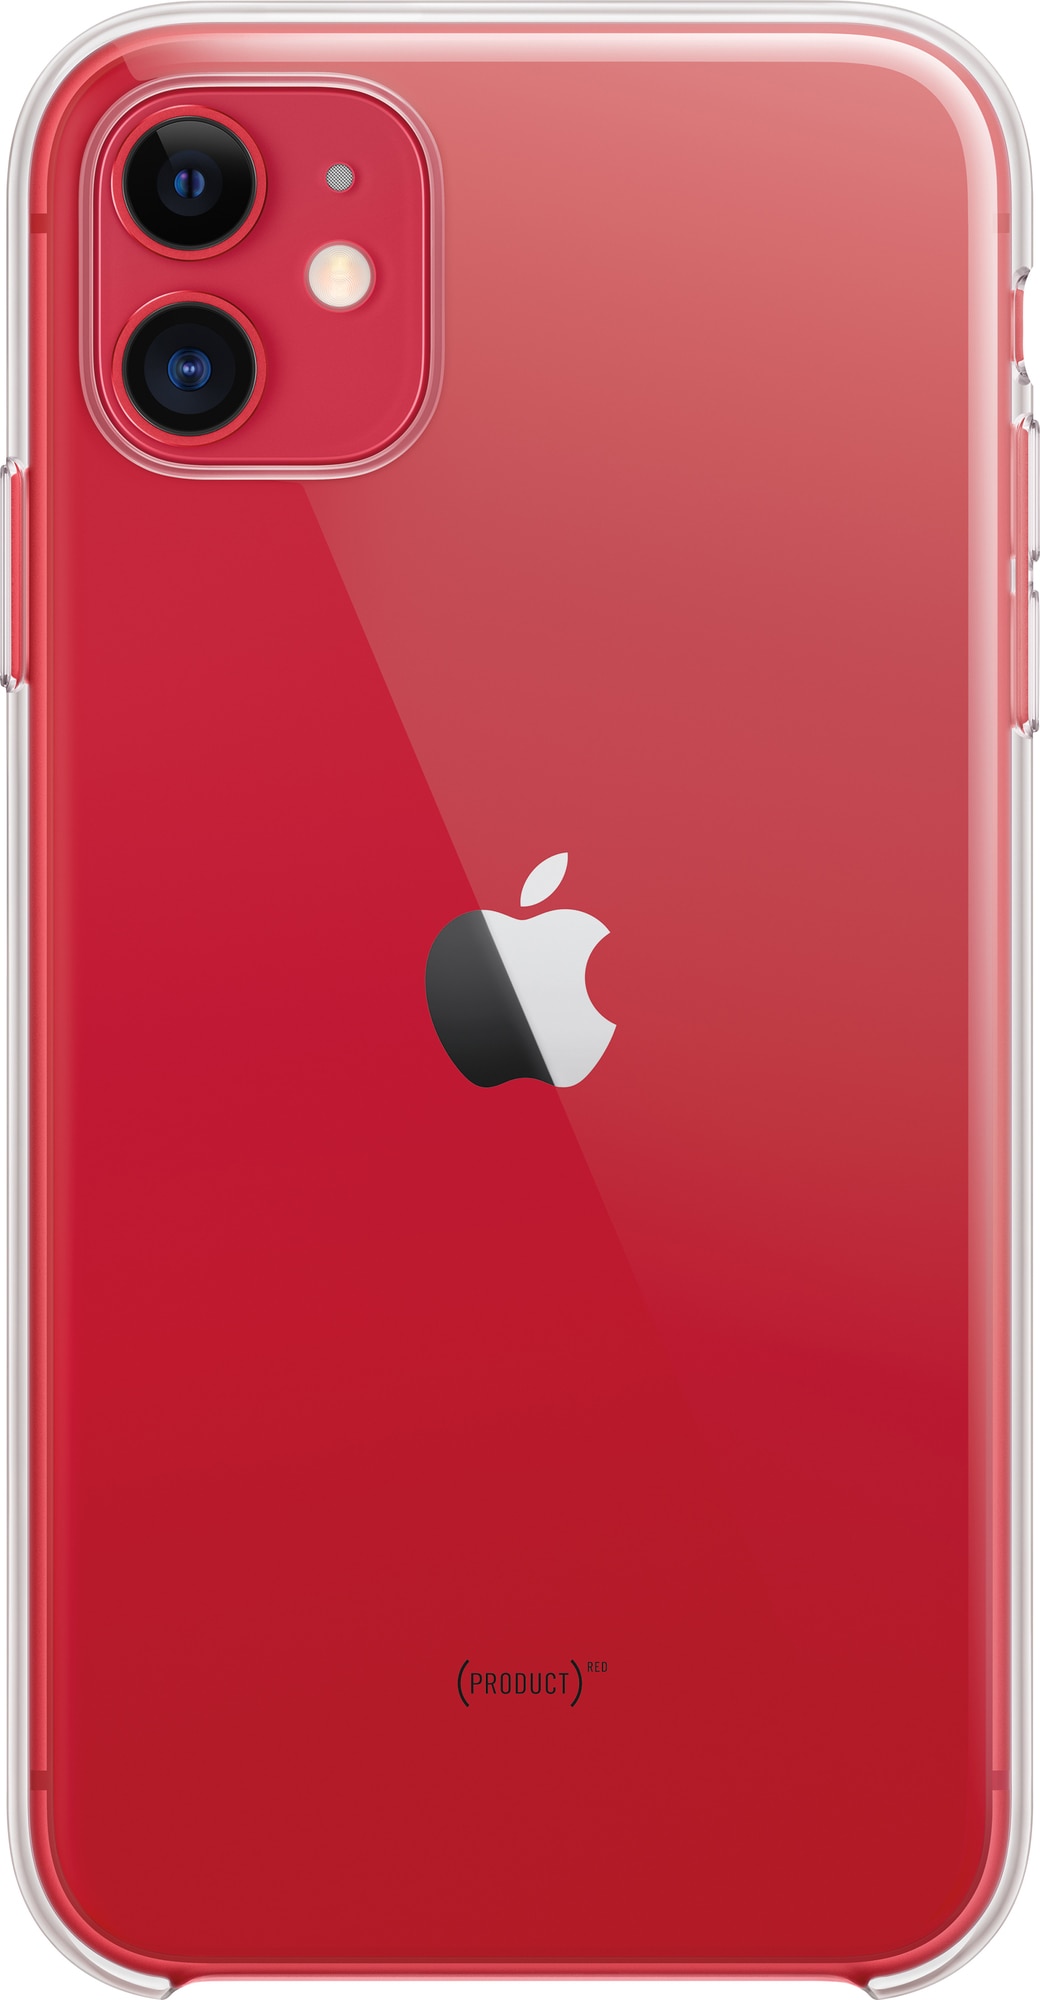 Iphone 11 Case Png inspireops